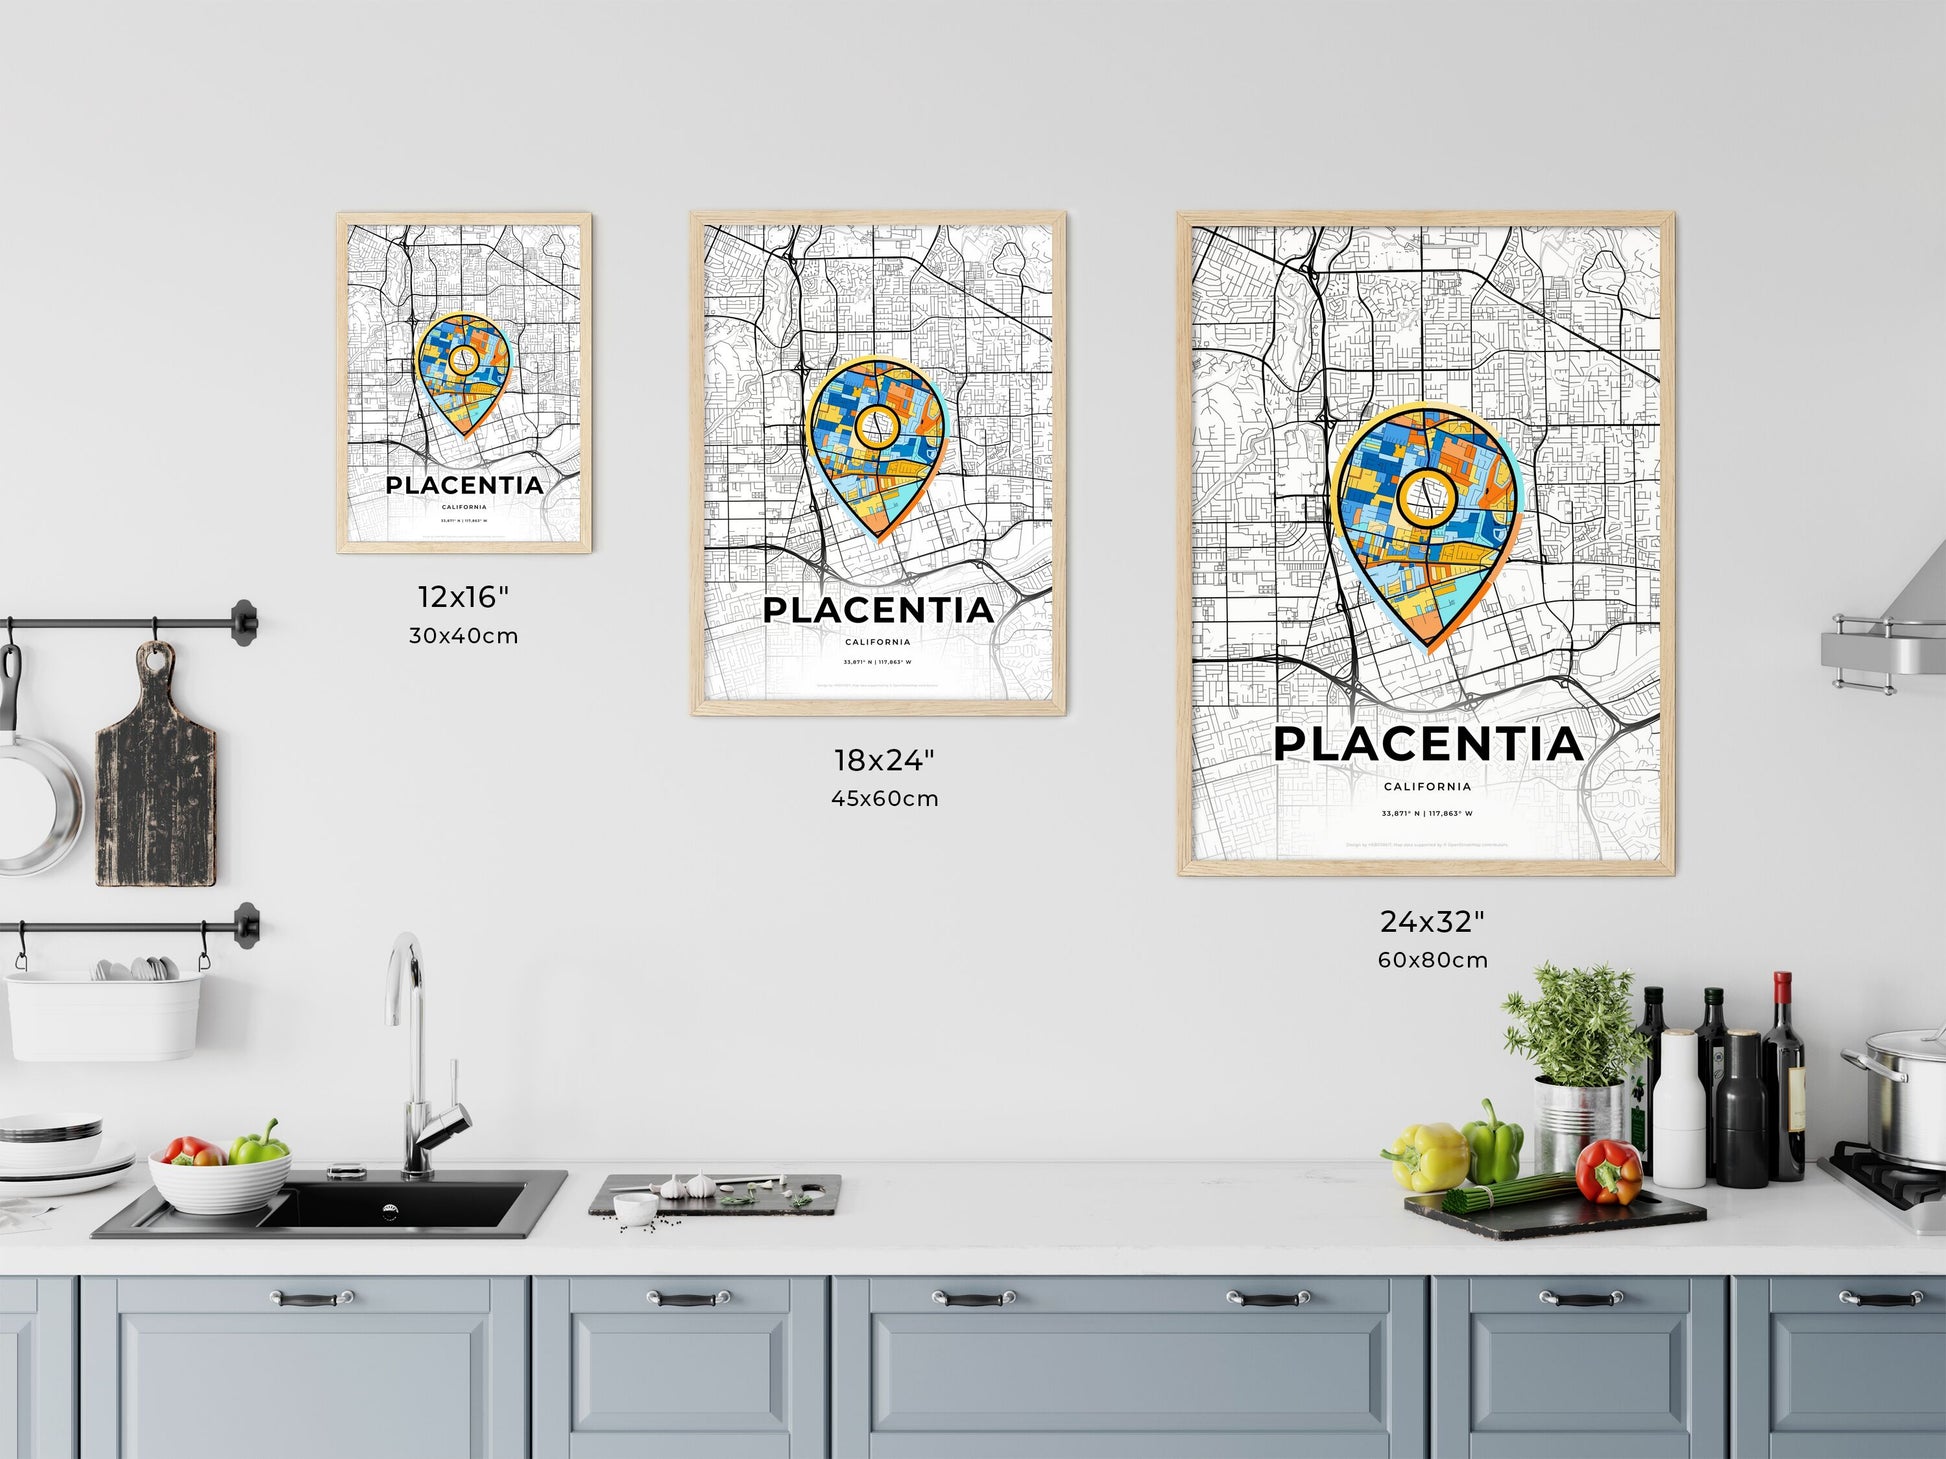 PLACENTIA CALIFORNIA minimal art map with a colorful icon.